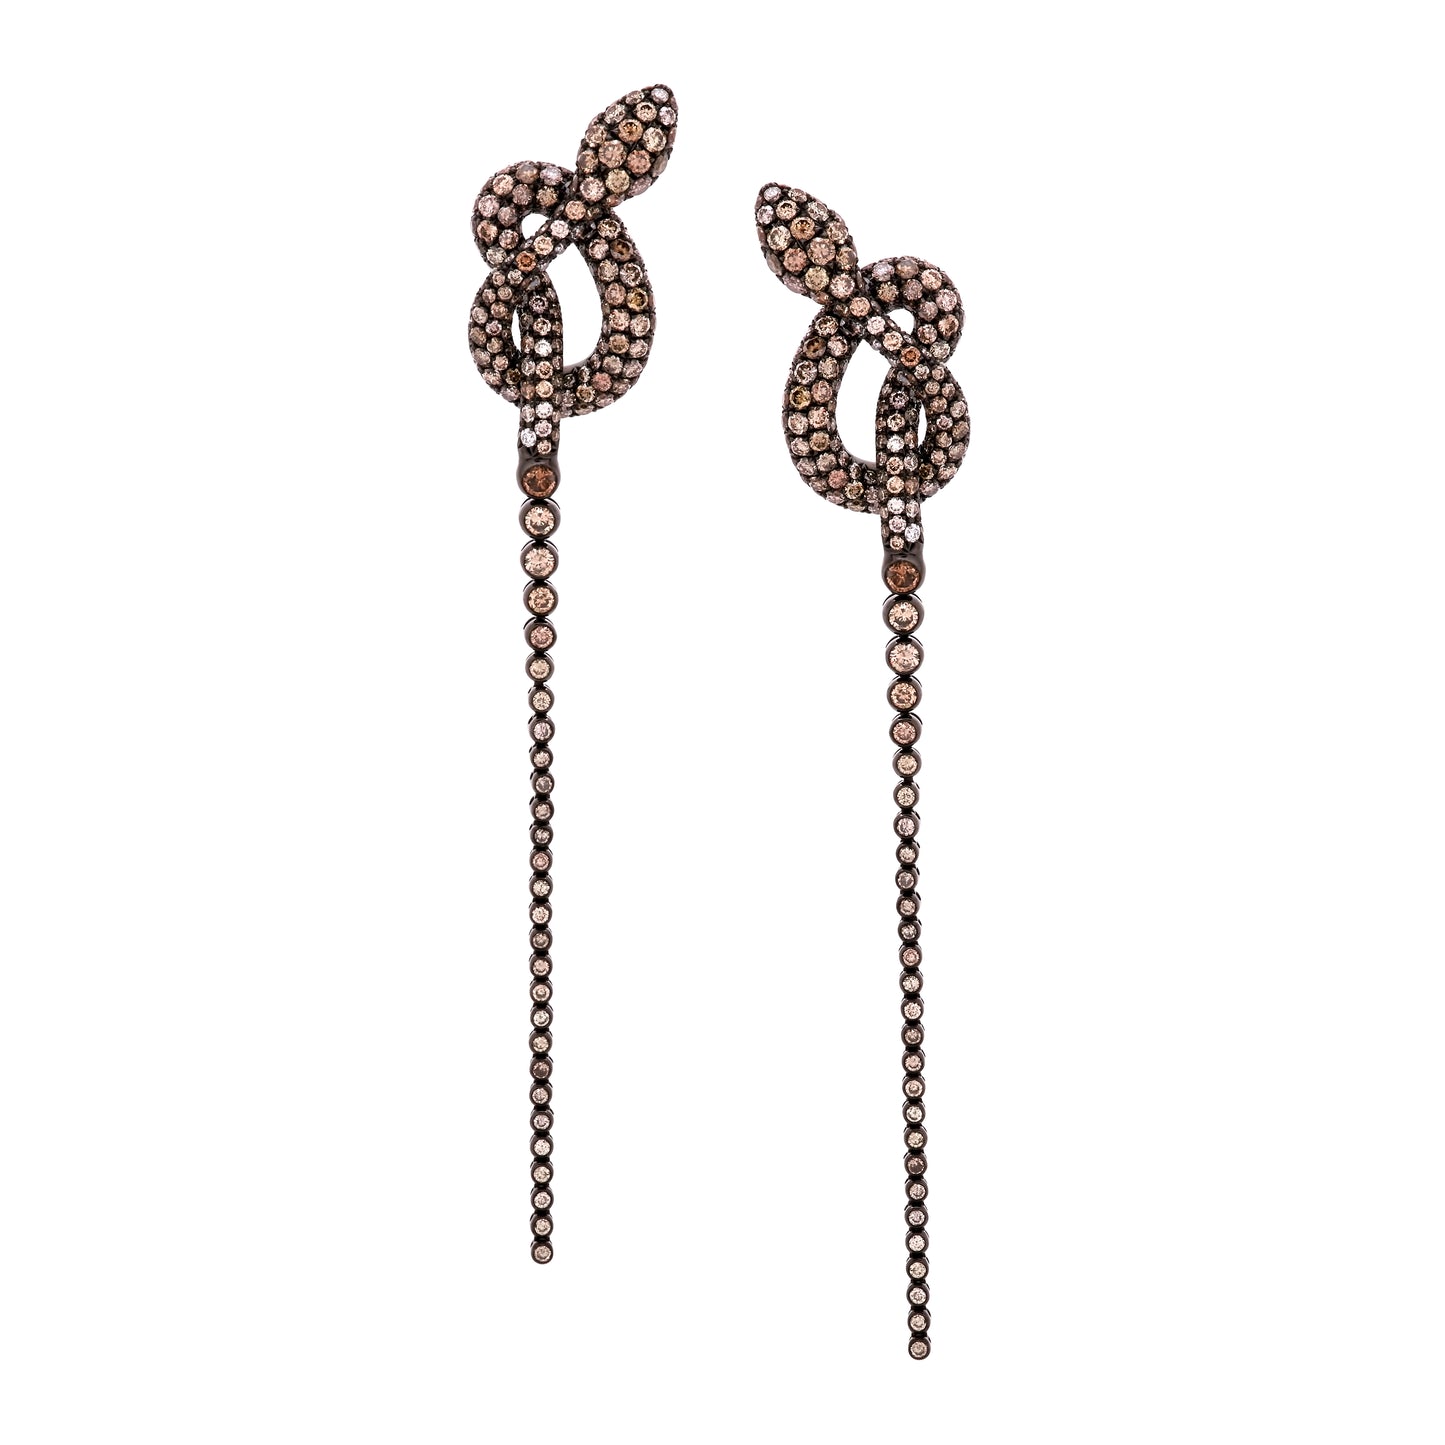 18K Gold Drop Earrings from Snake Collection